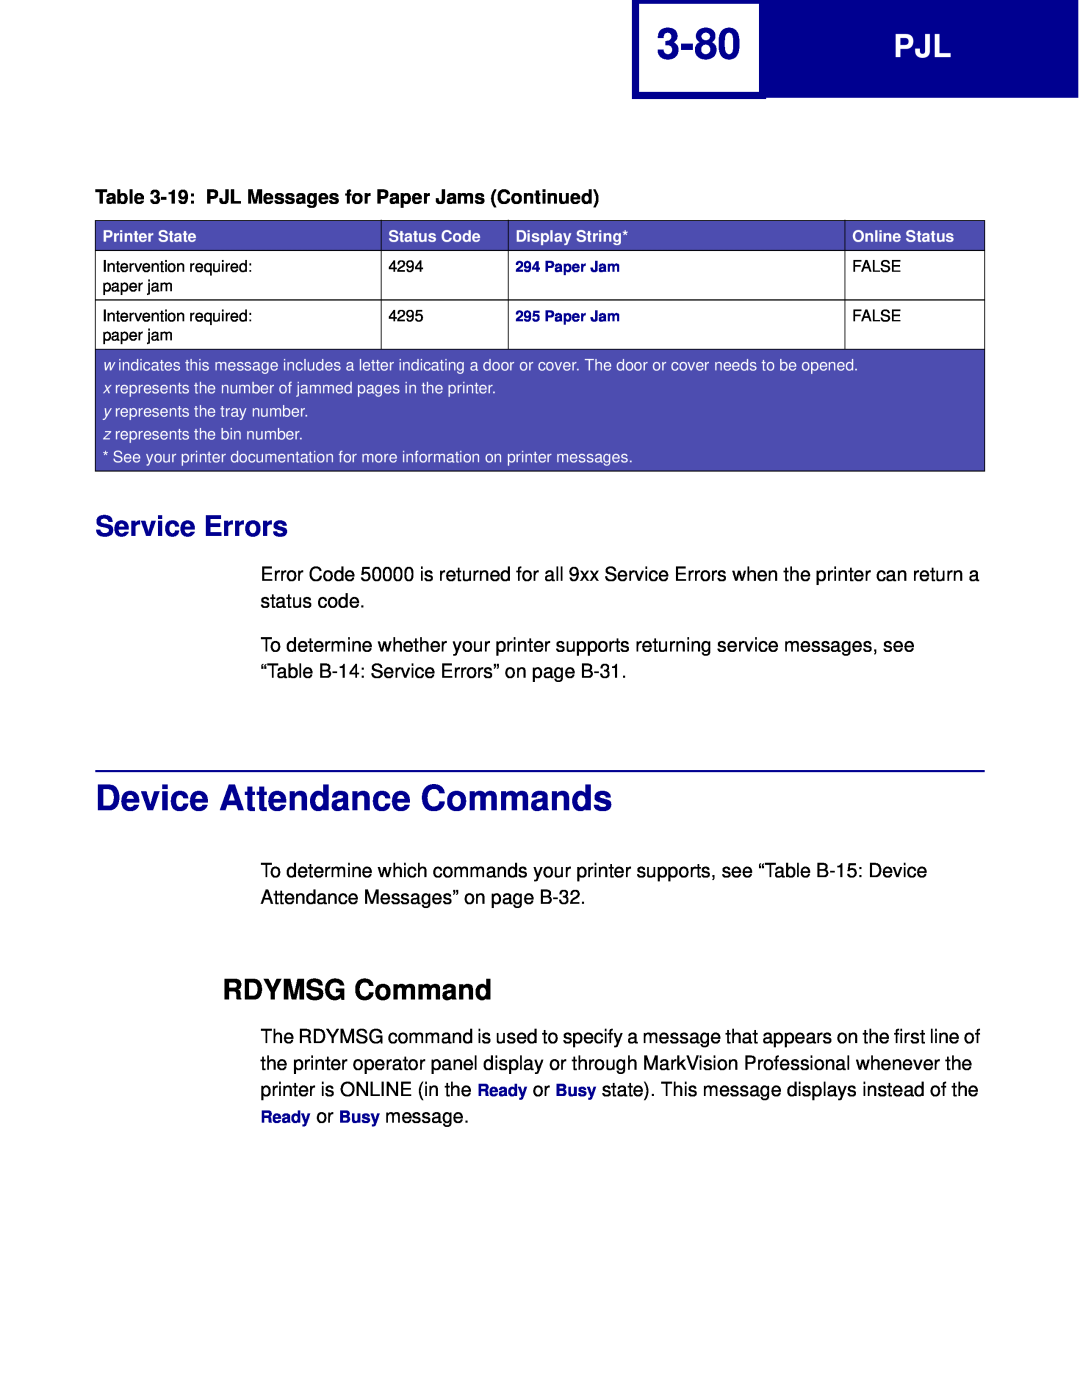 Lexmark C762 3-80, Device Attendance Commands, Service Errors, RDYMSG Command, 19 PJL Messages for Paper Jams Continued 